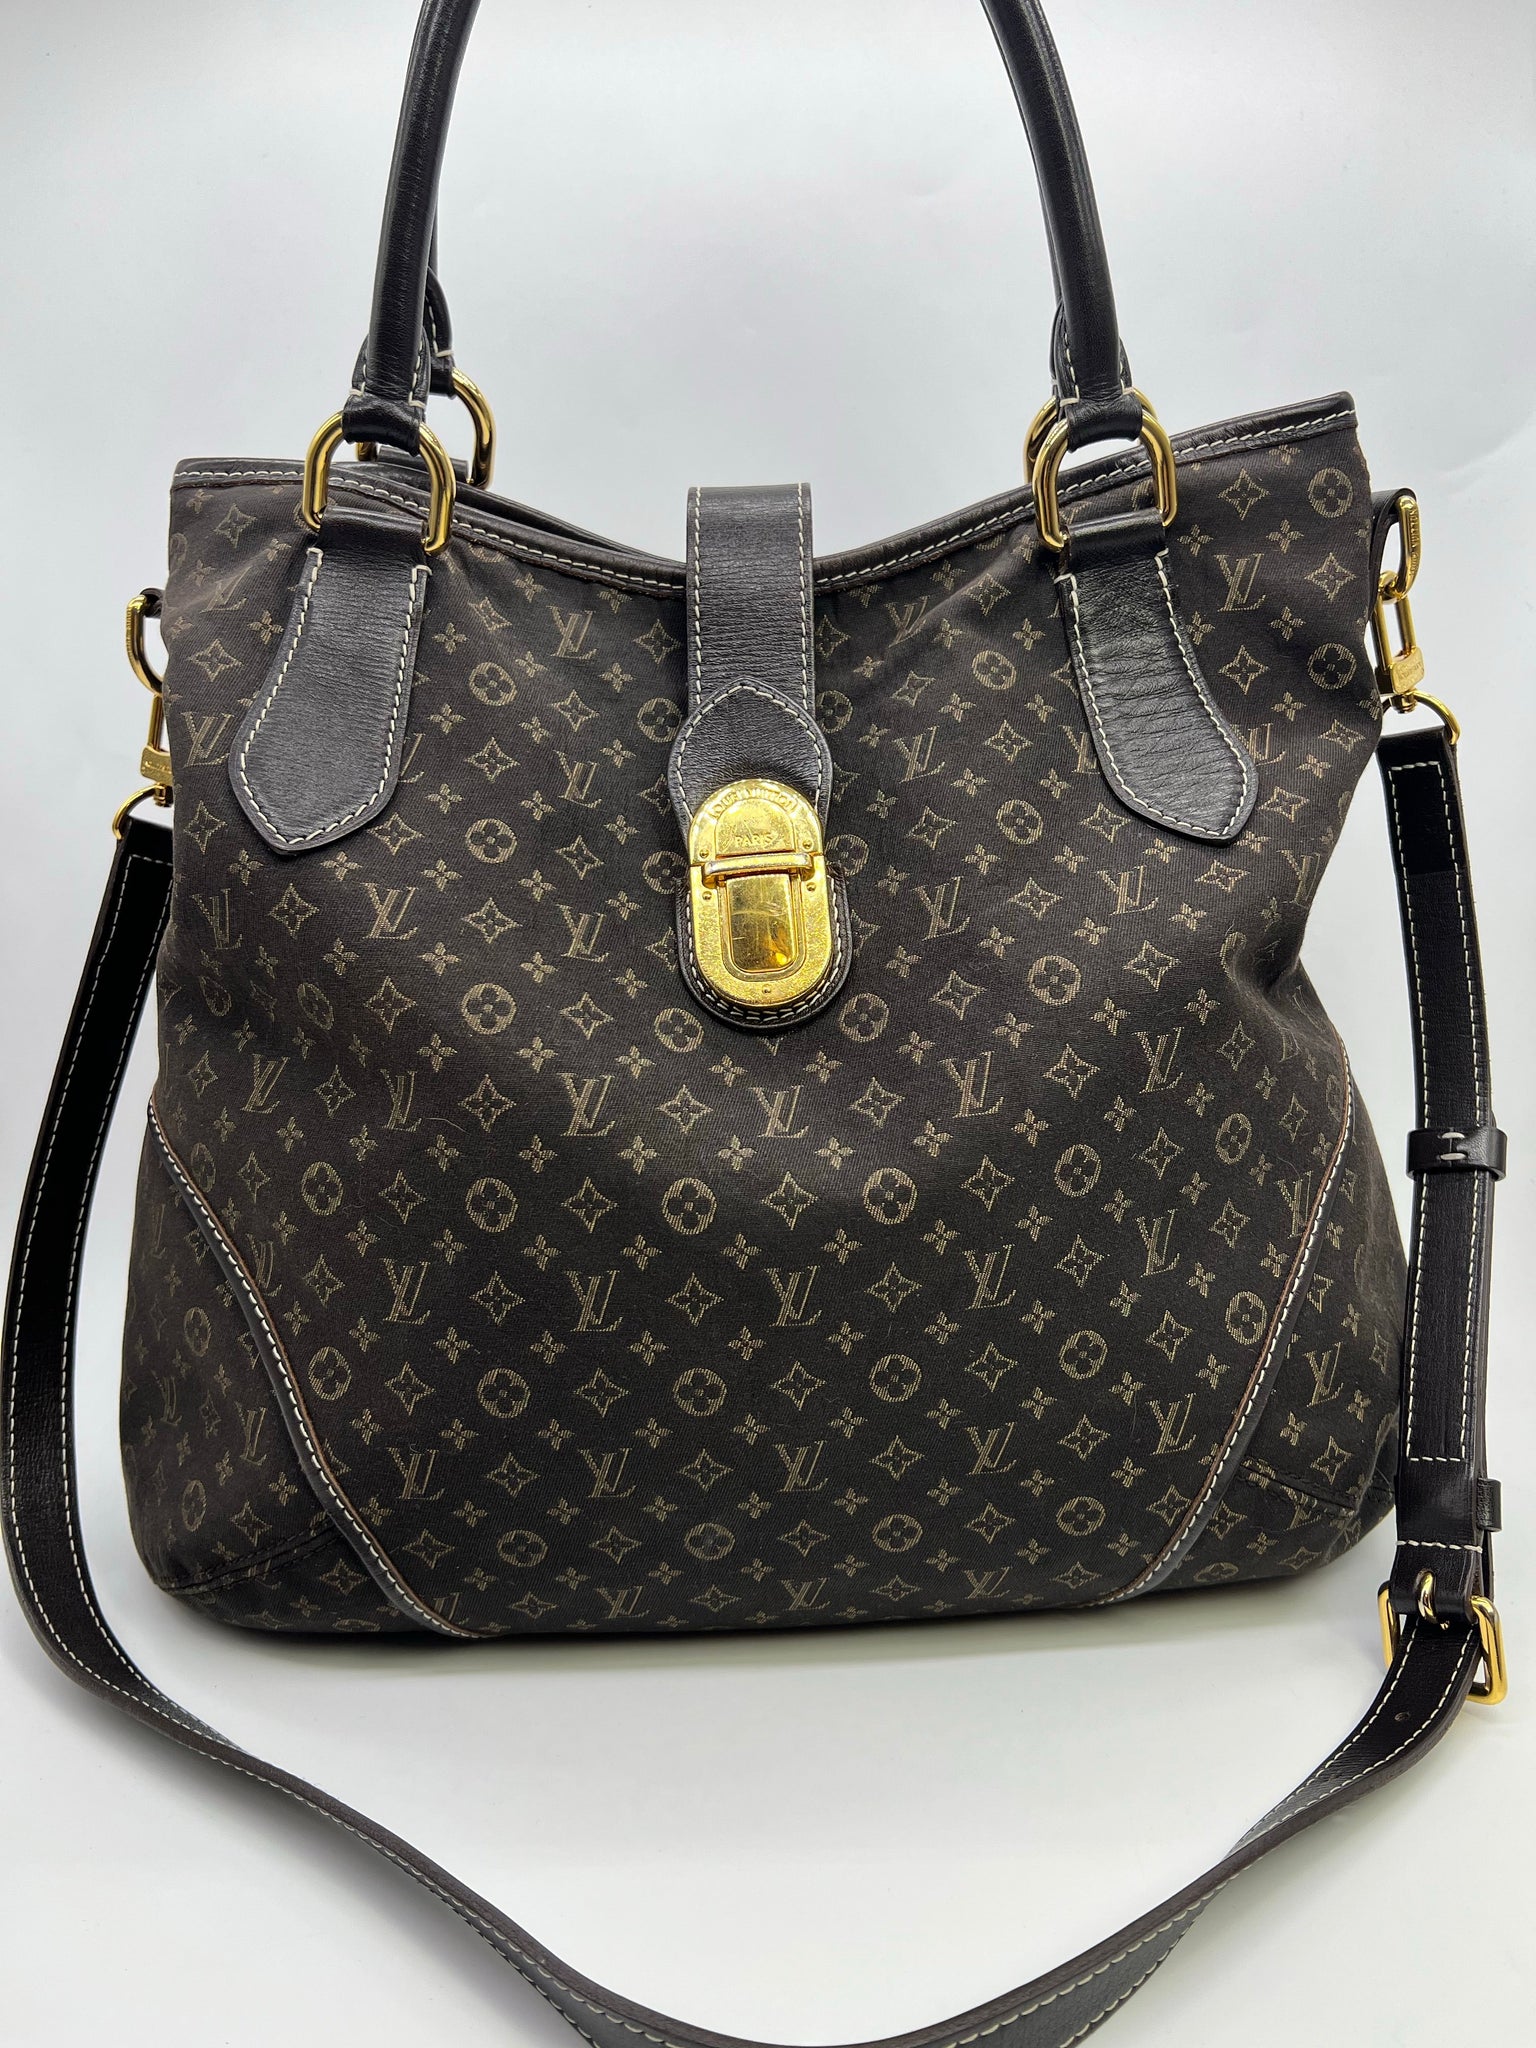 LOUIS VUITTON HANDBAG, monogram pattern with leather trims and two